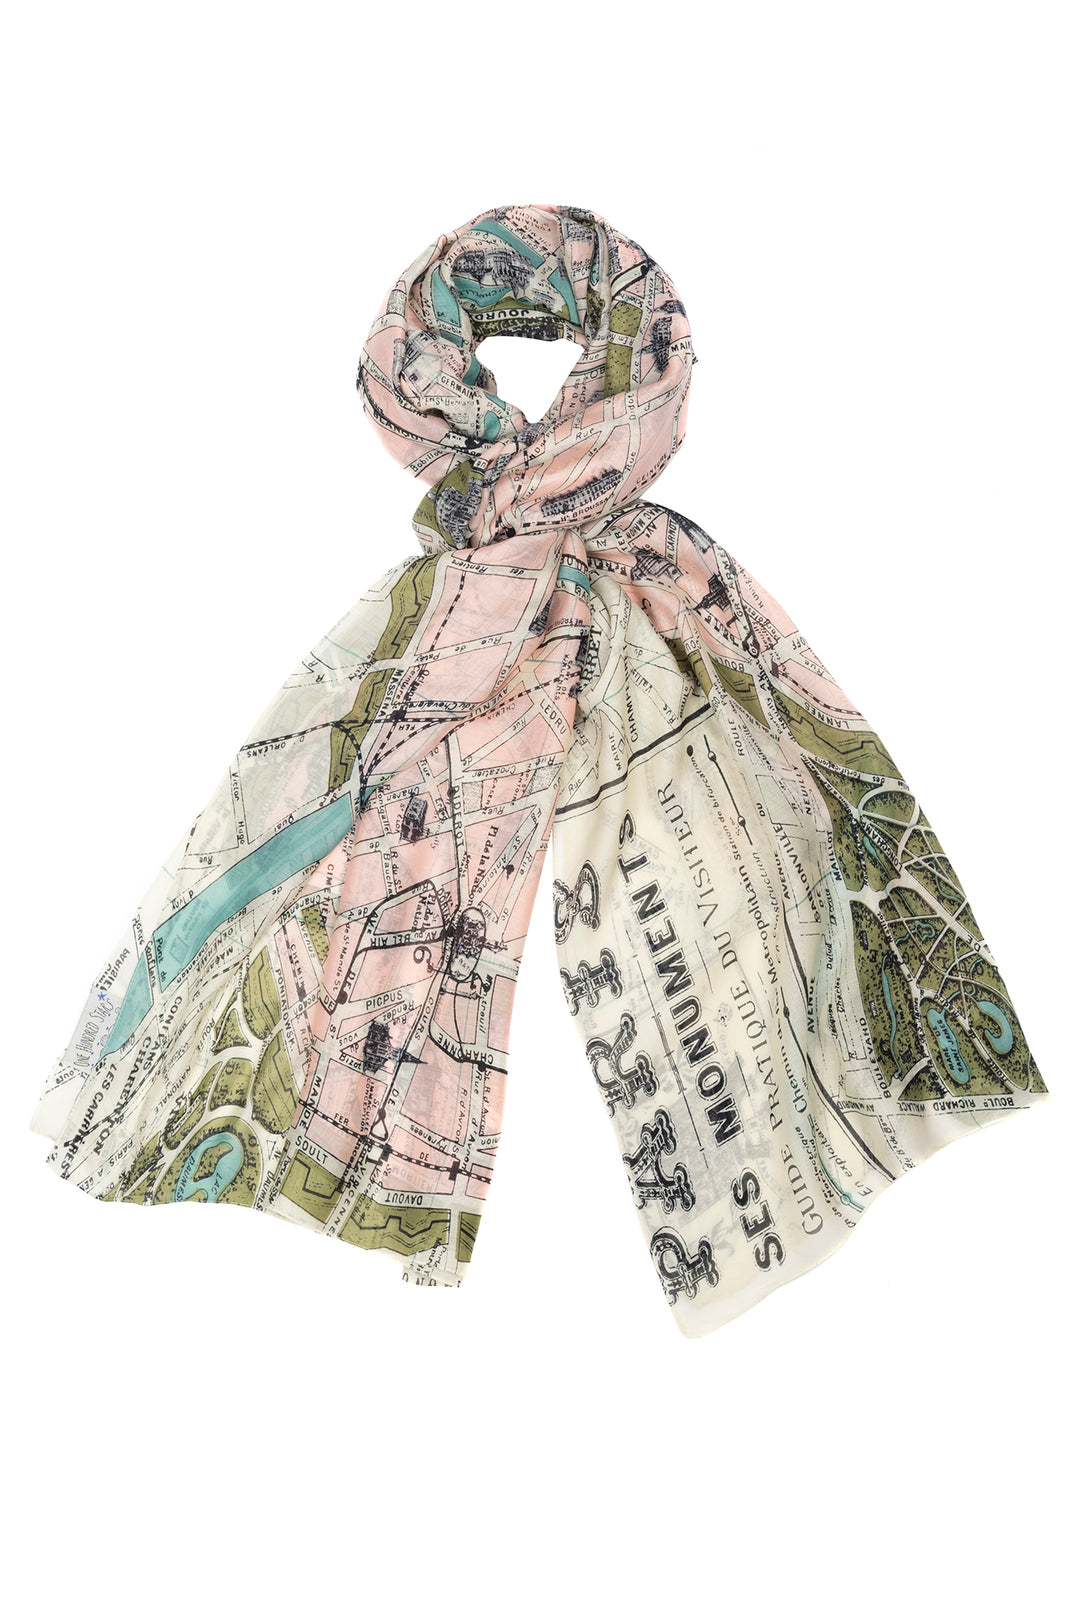 Paris Map Scarf - One Hundred Stars